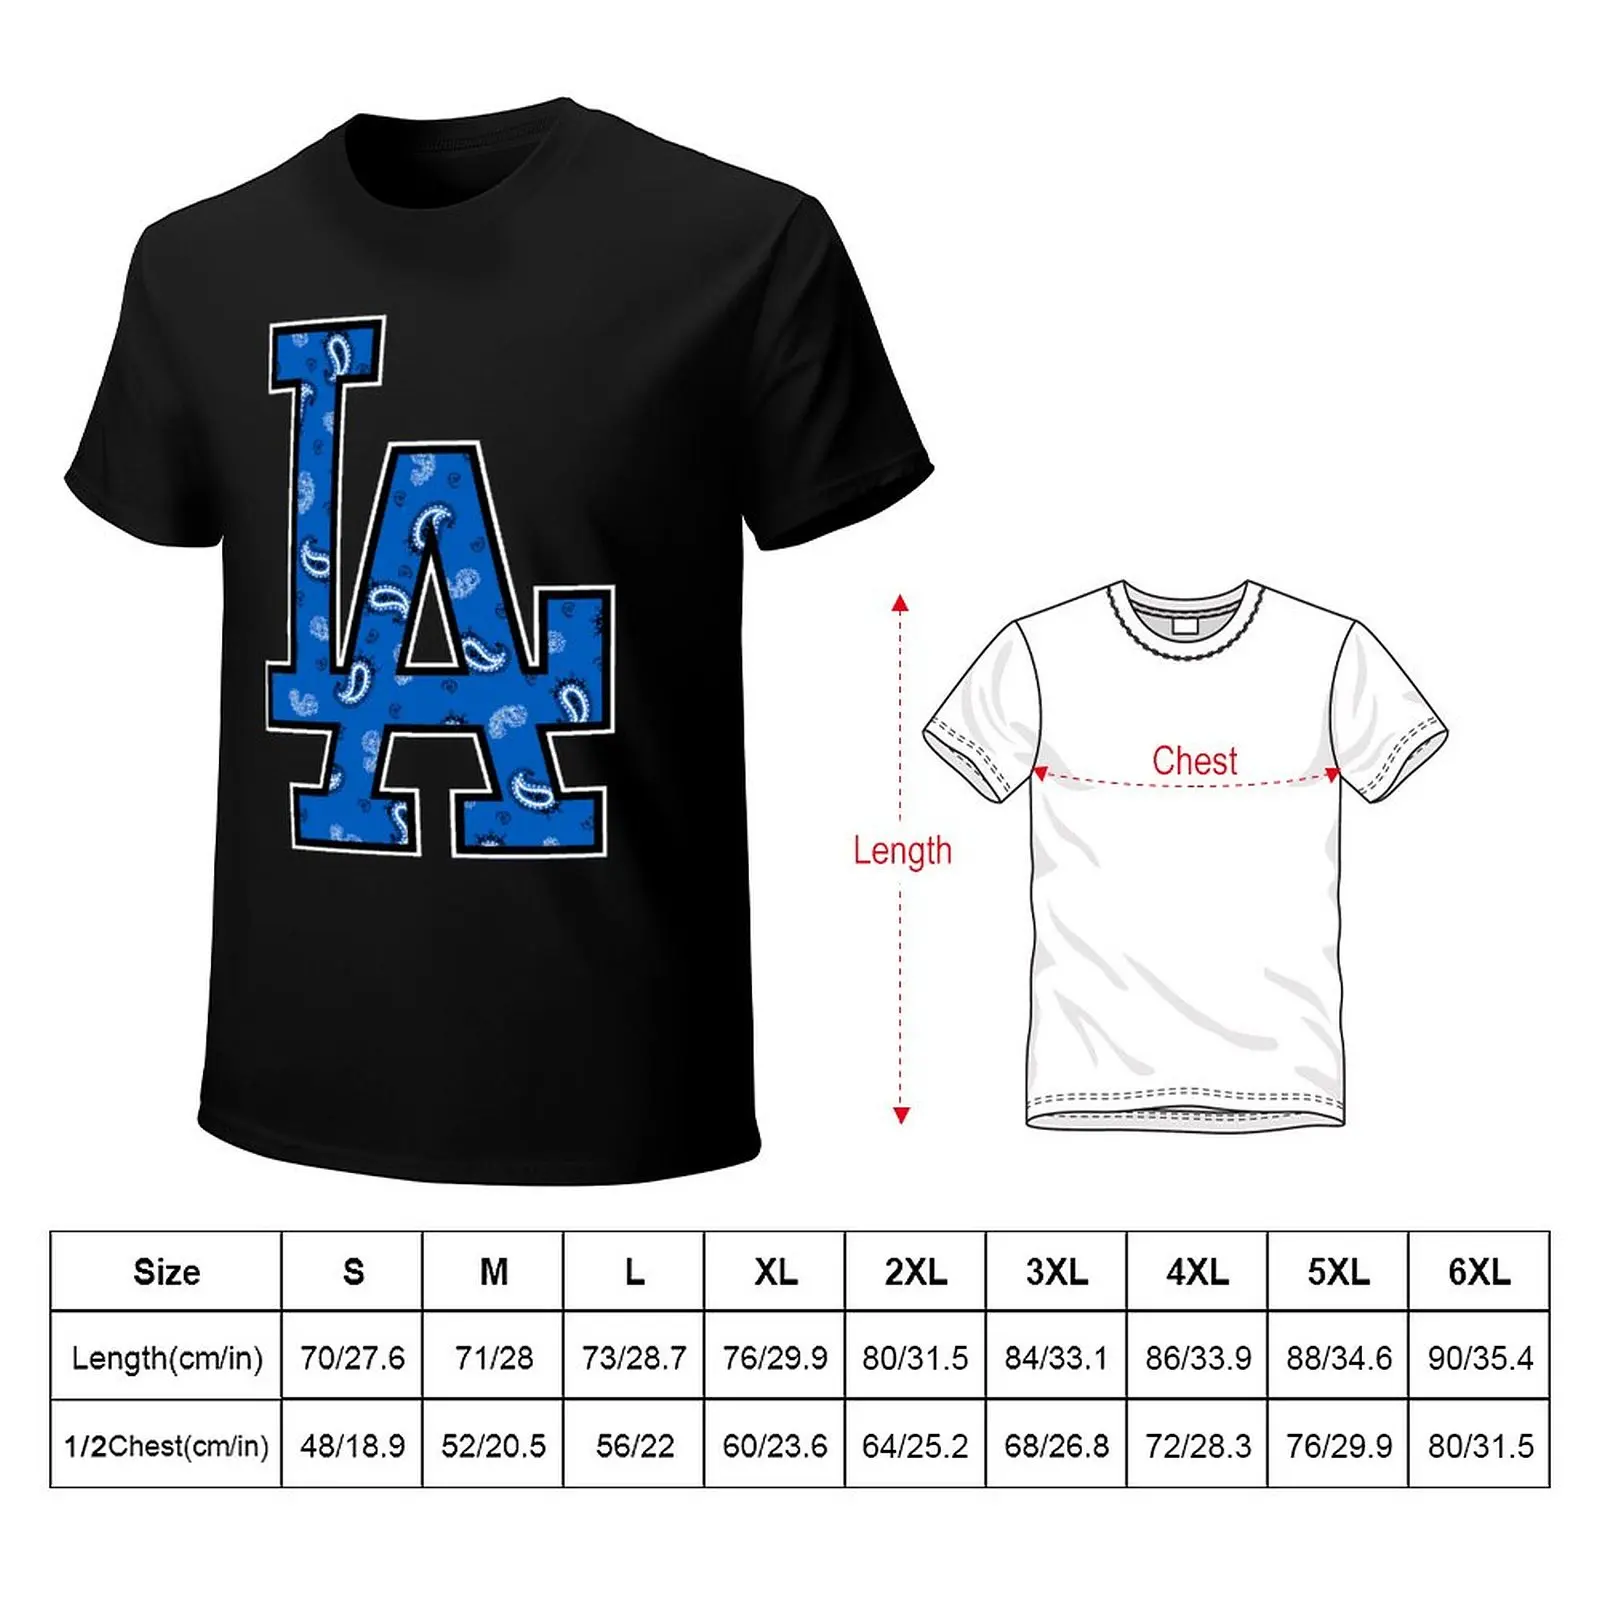 Tees LAD Bandana Crips Top Quality   Home Eur Size  High Grade images - 6